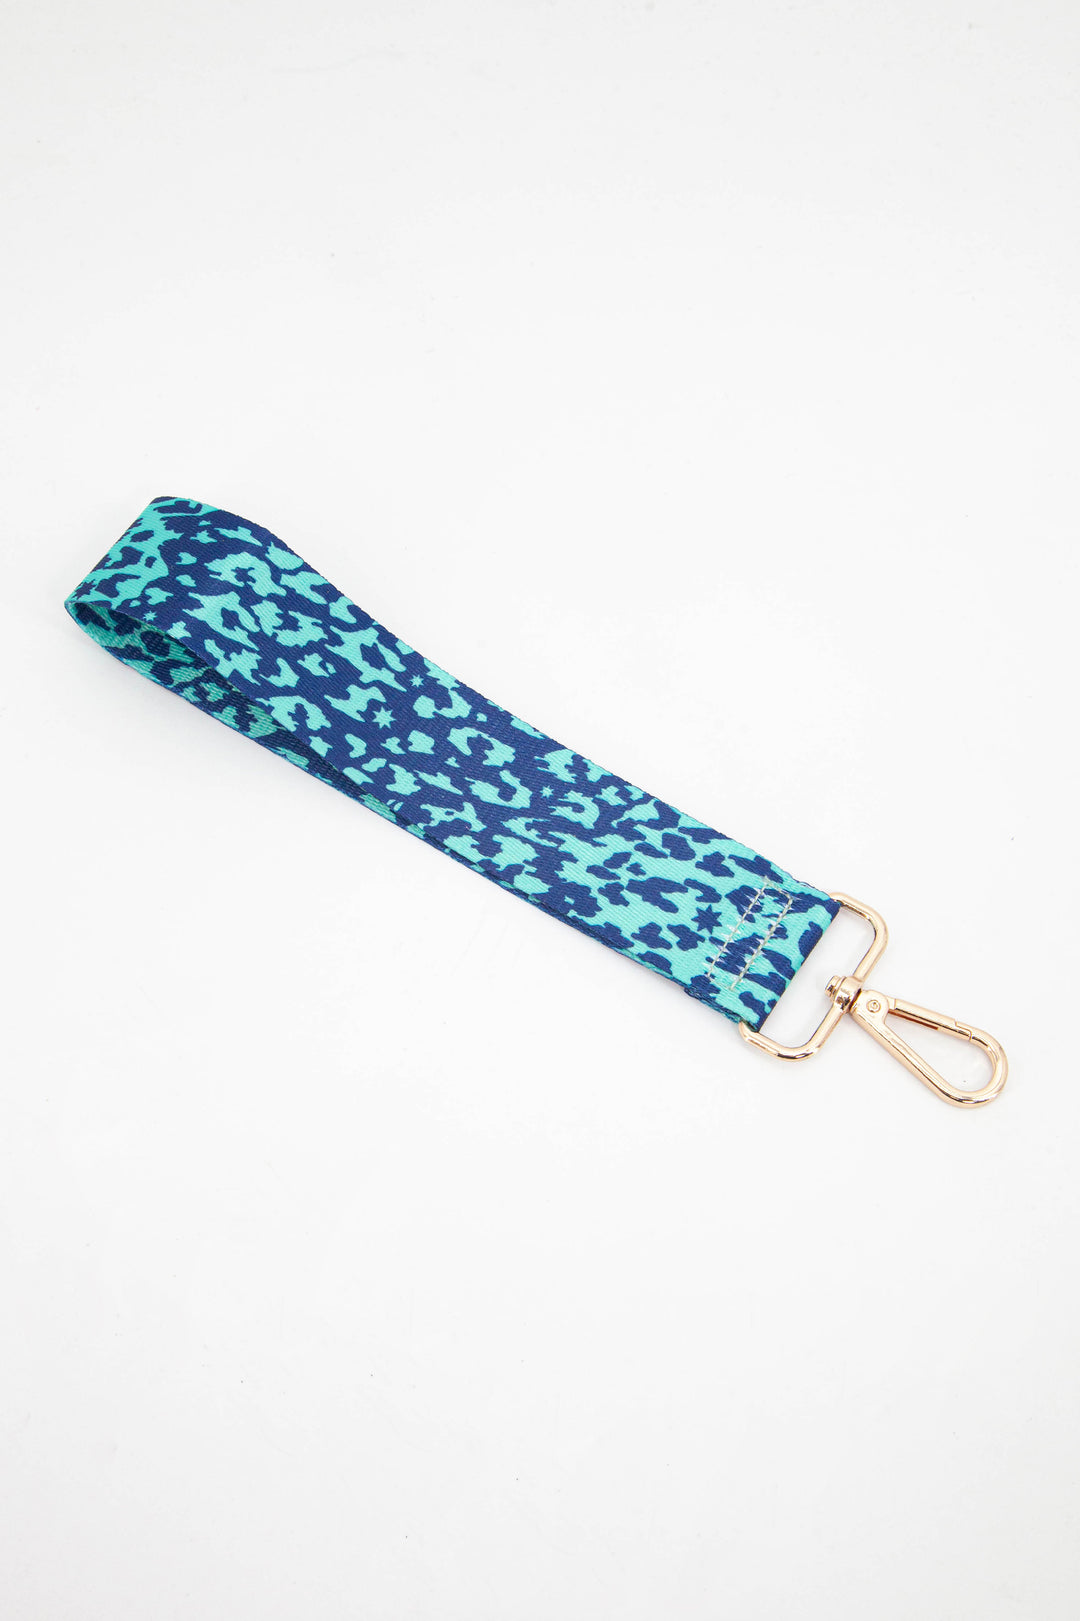 aqua blue and navy blue leopard print wristlet bag strap with a subtle scattered star pattern throughout the design